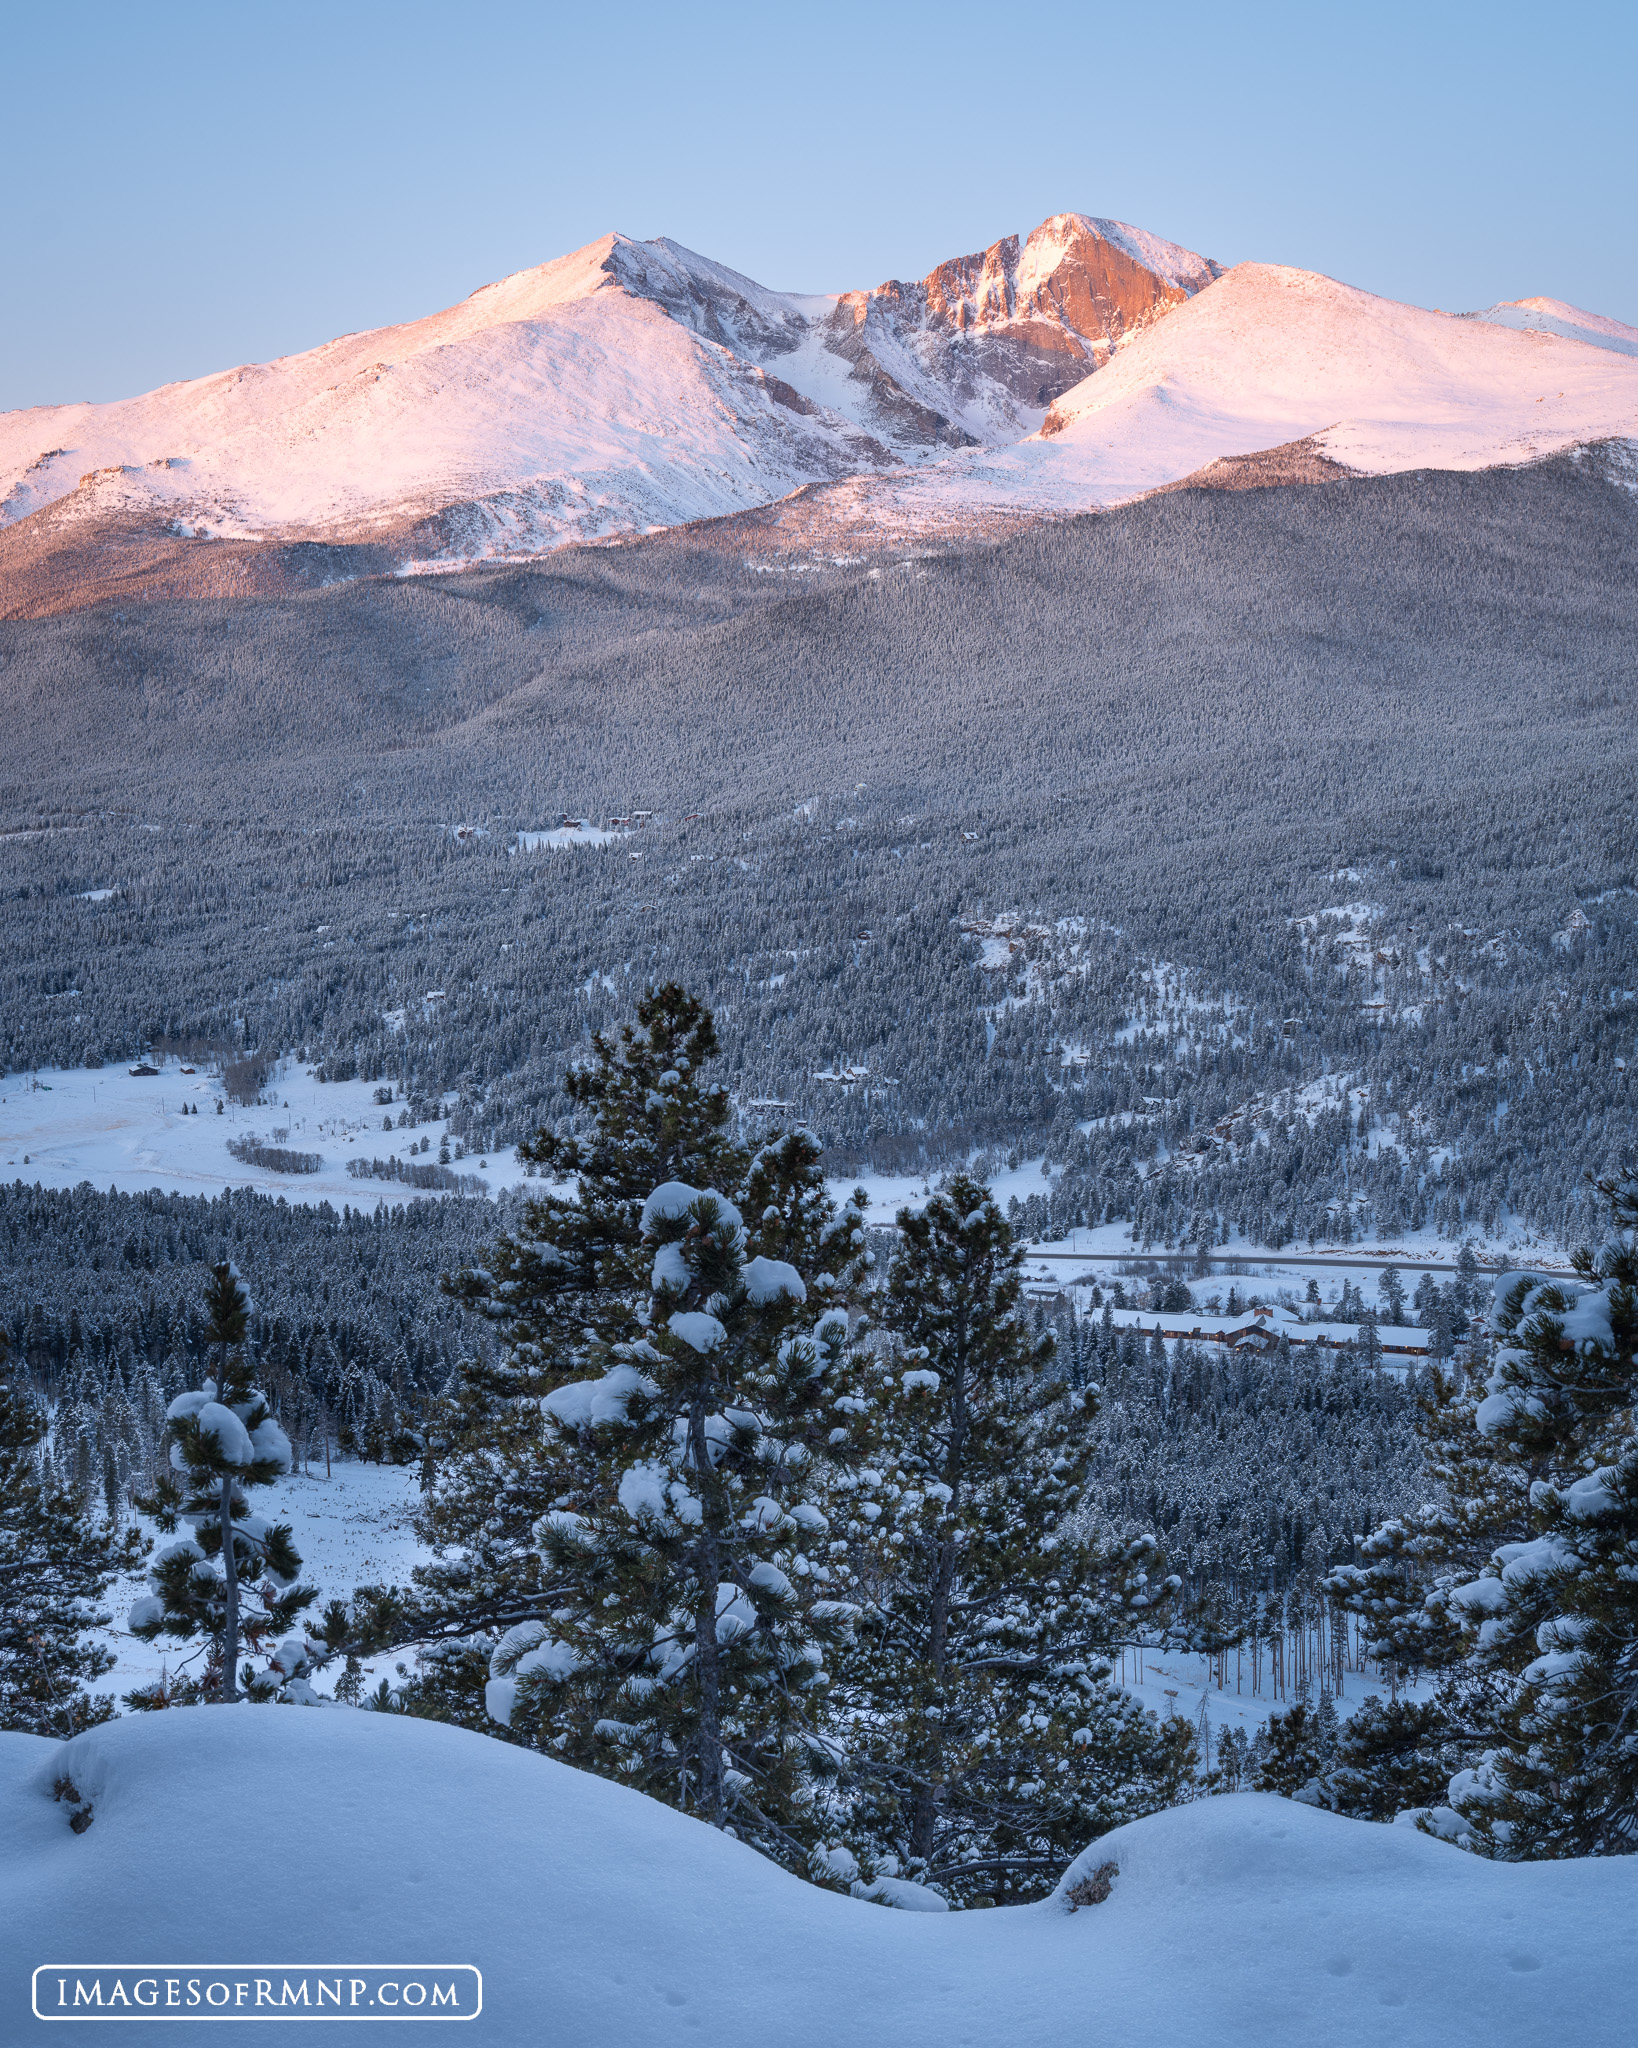 Longs Peak, the highest mountain in Rocky Mountain National Park, towers over Highway 7 as it surveys the world from a towering...